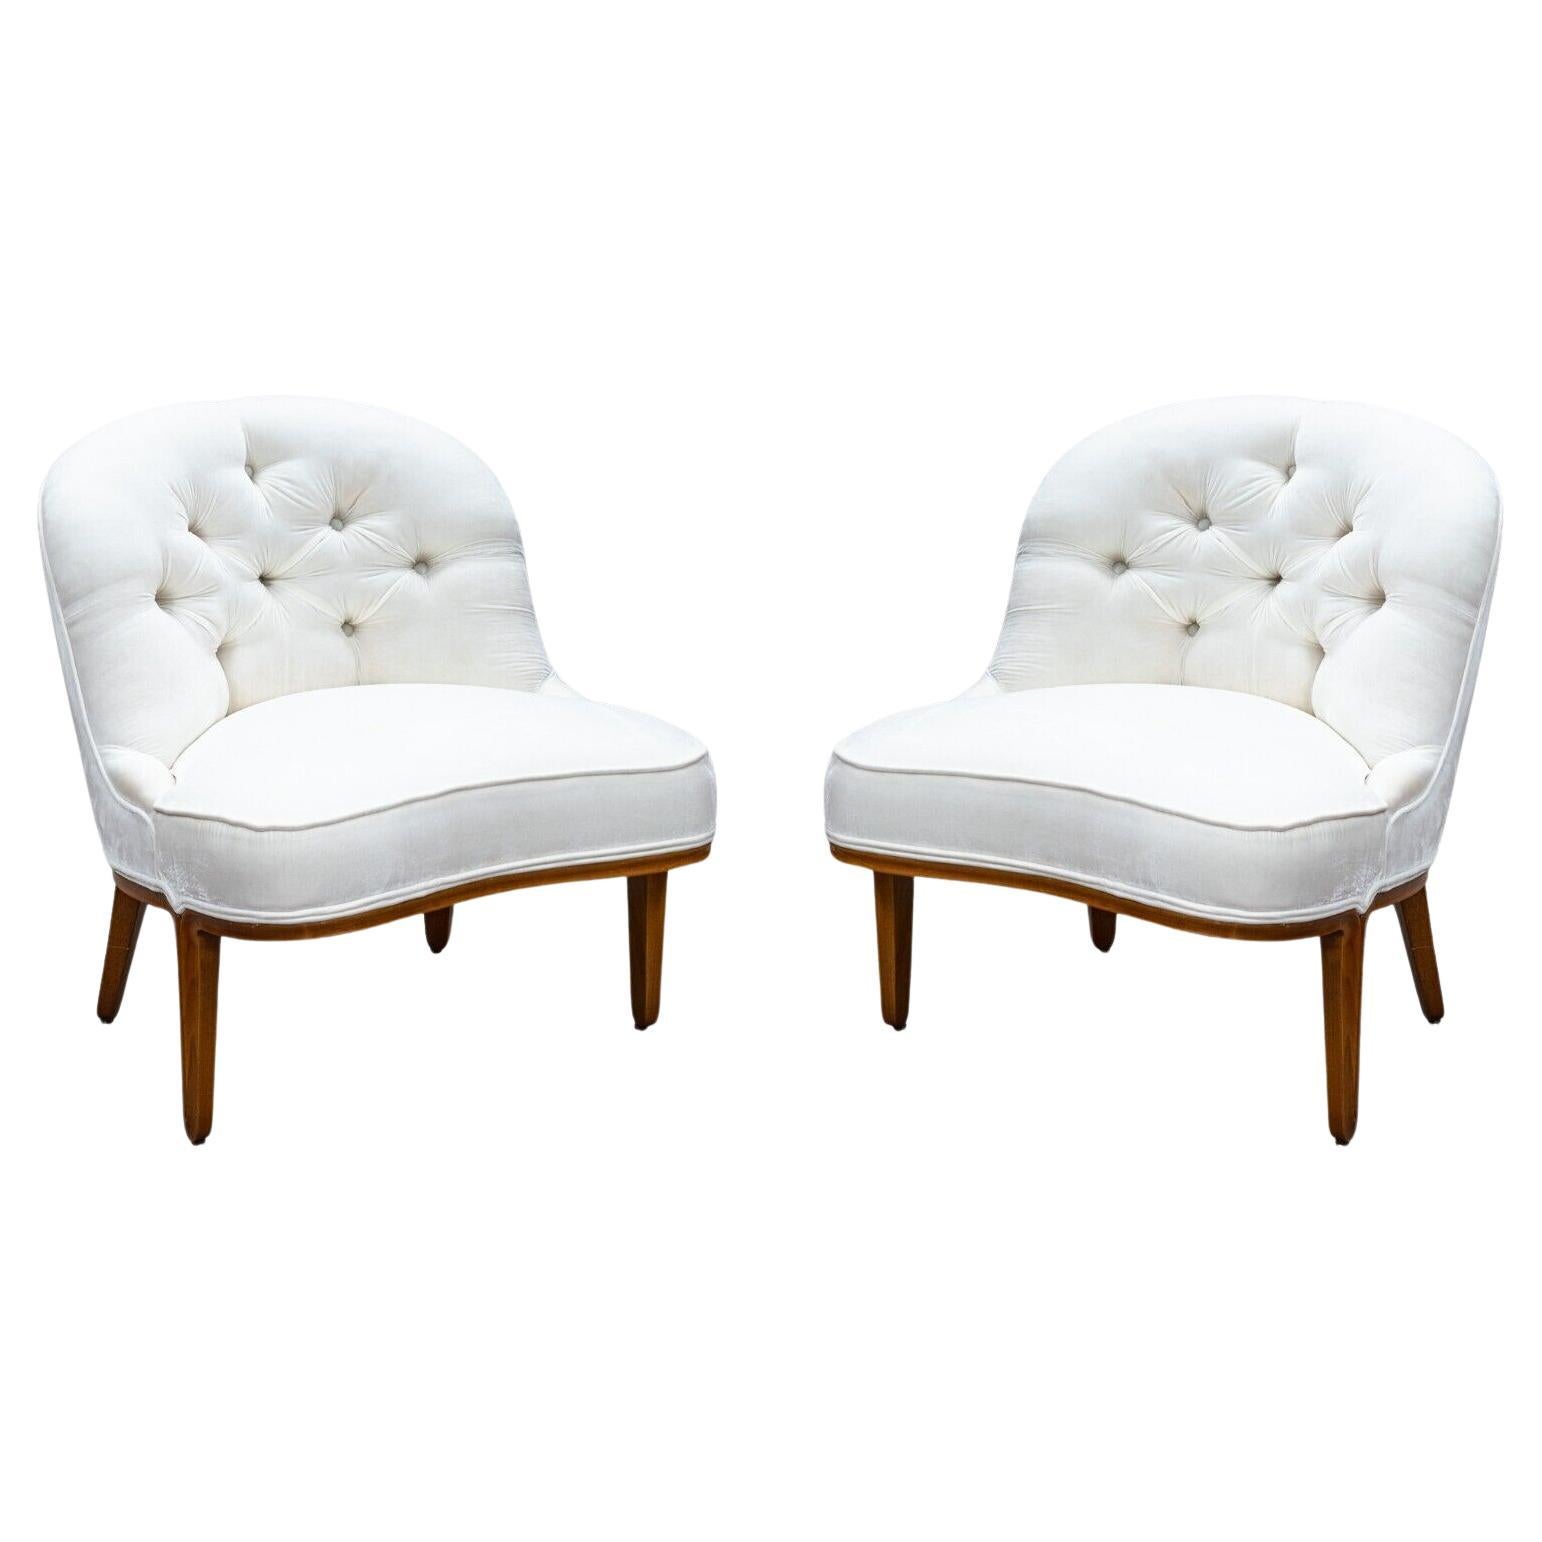 Pair of Edward Wormley for Dunbar Mid Century White Tufted Janus Slipper Chairs